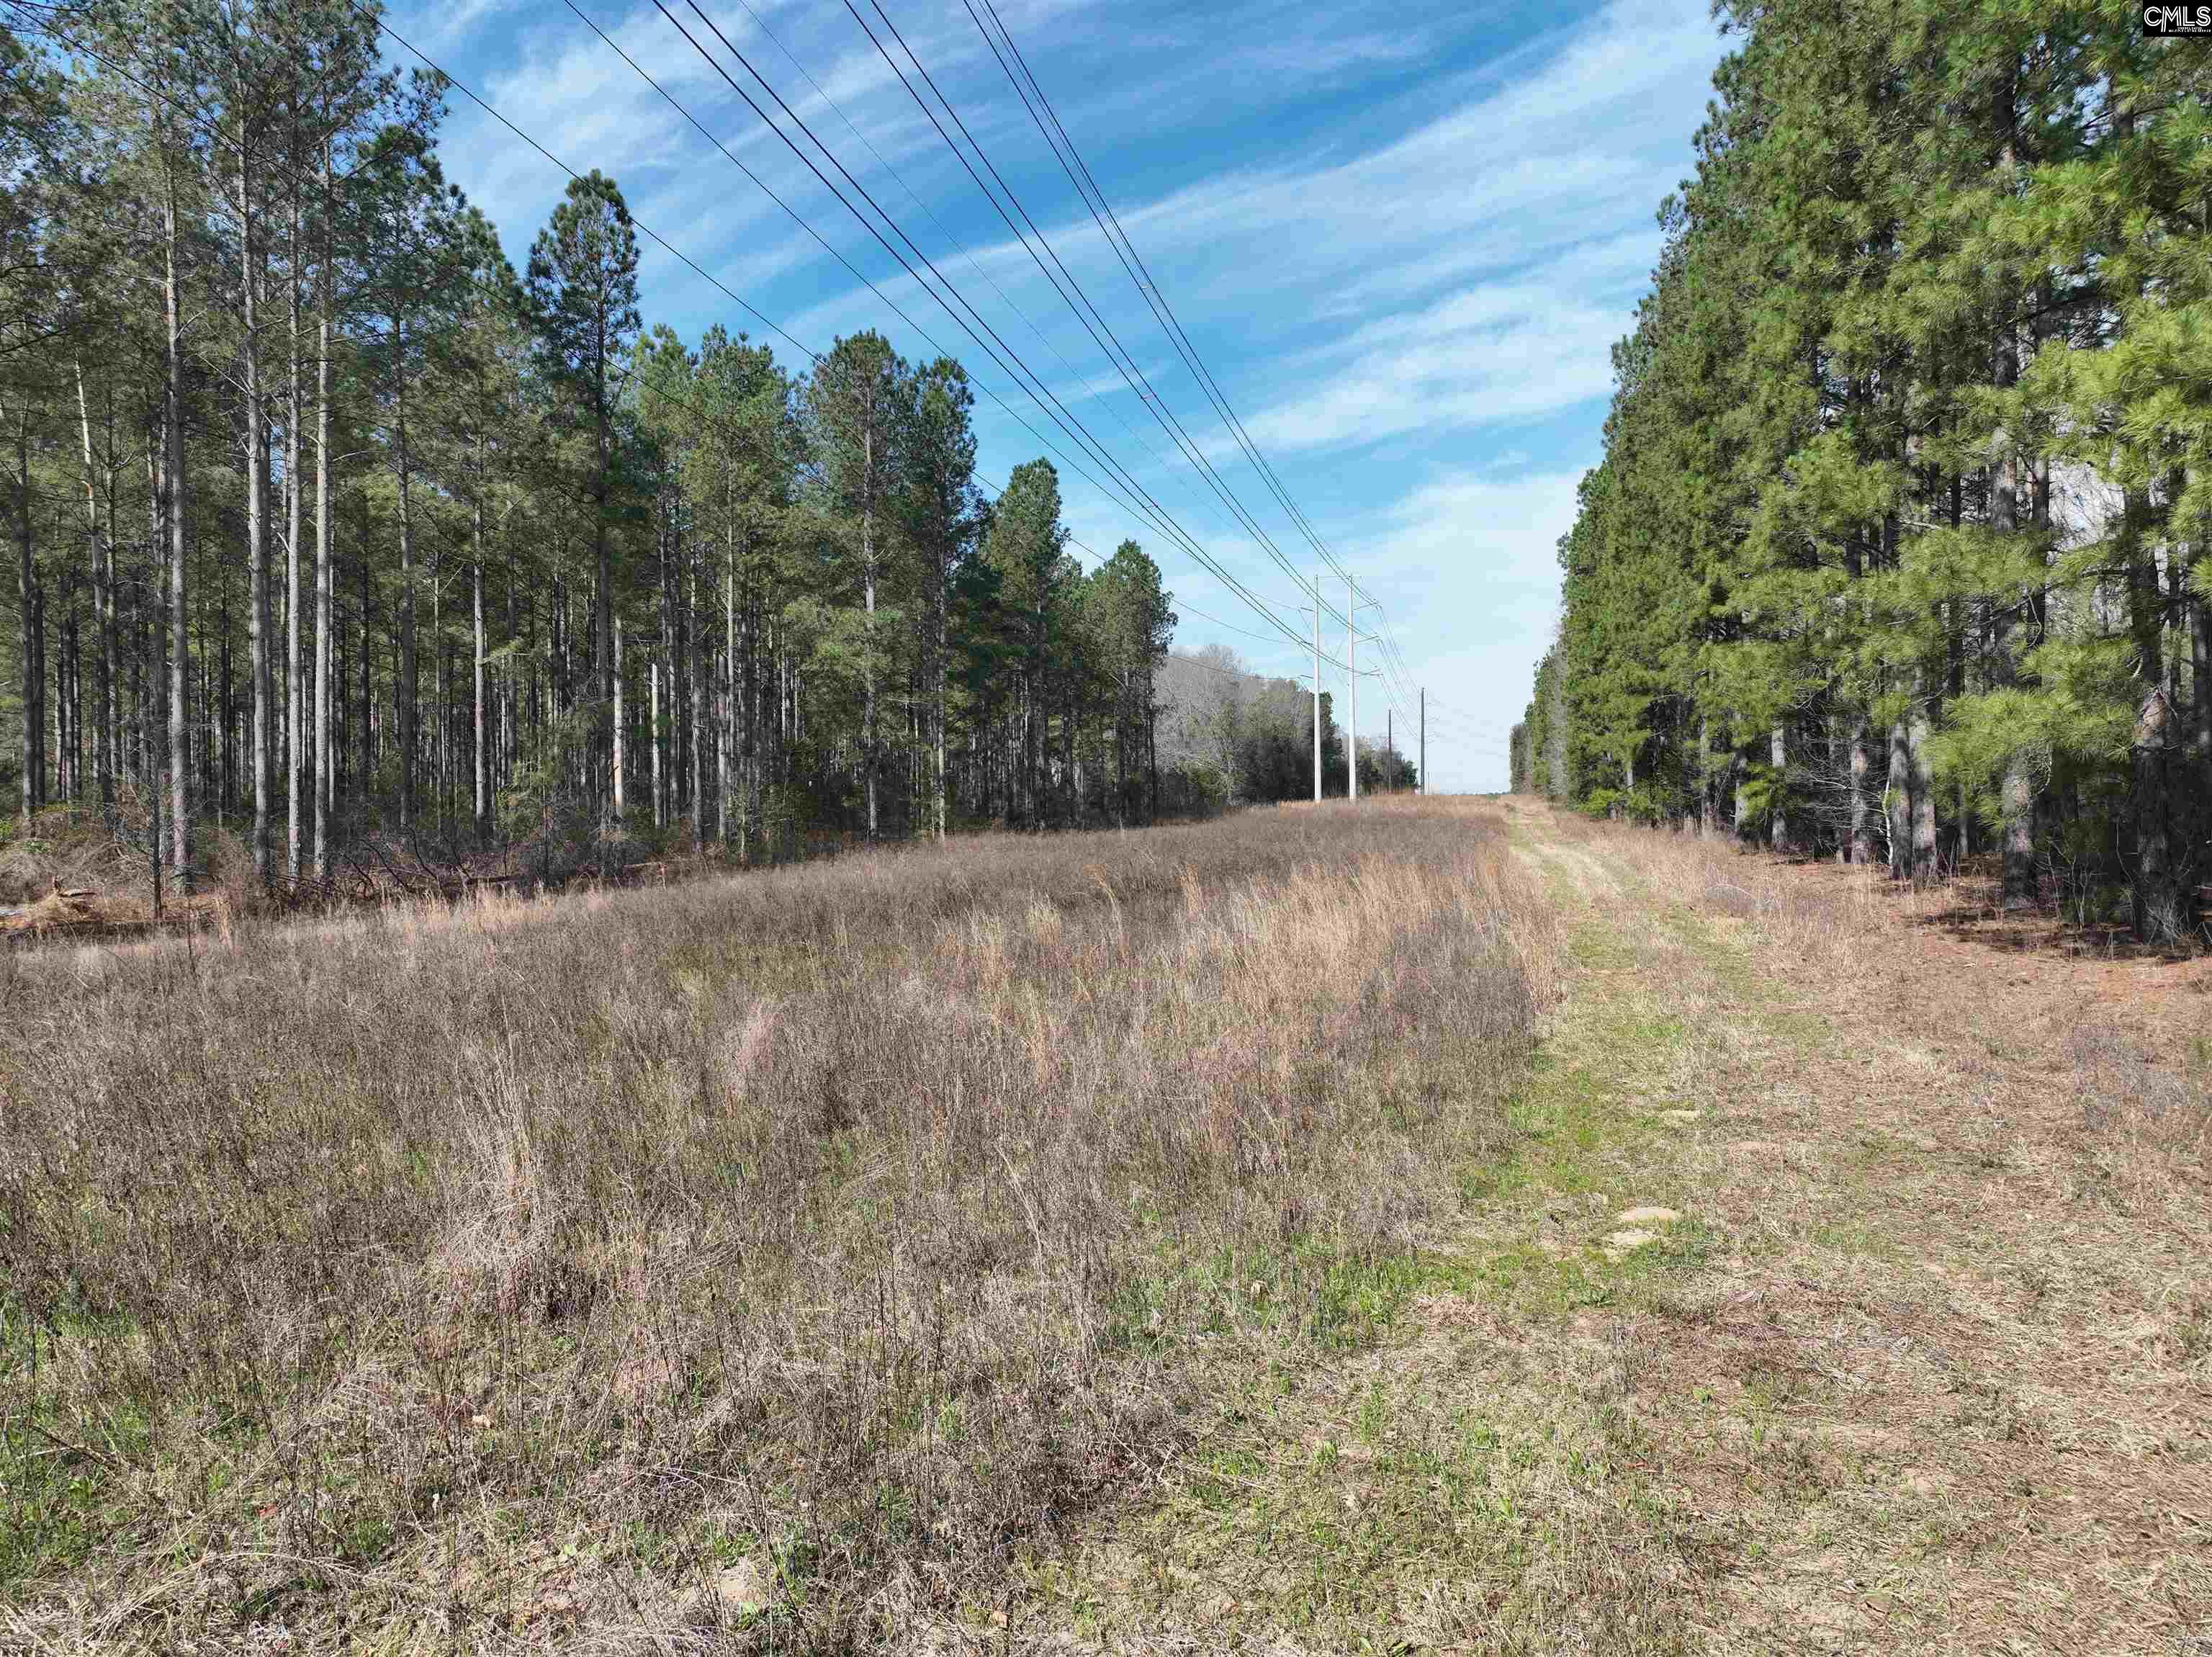  Lots For Sale - 000 Salley Road, Salley, SC - 5 